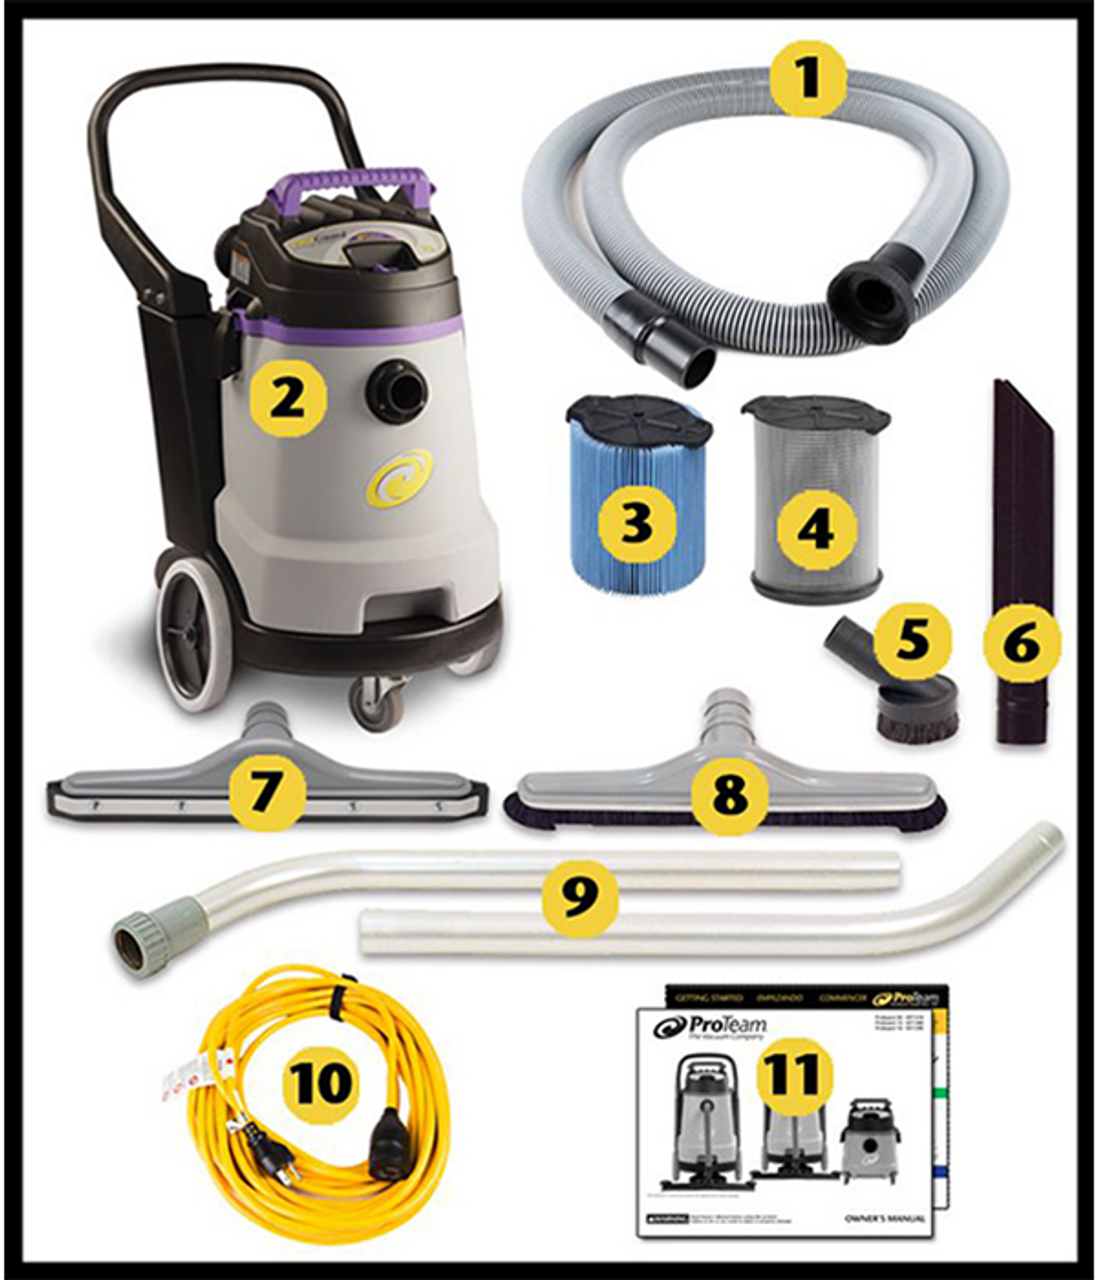 Michael's Equipment :: Products :: Canister Vacuums - Wet/Dry